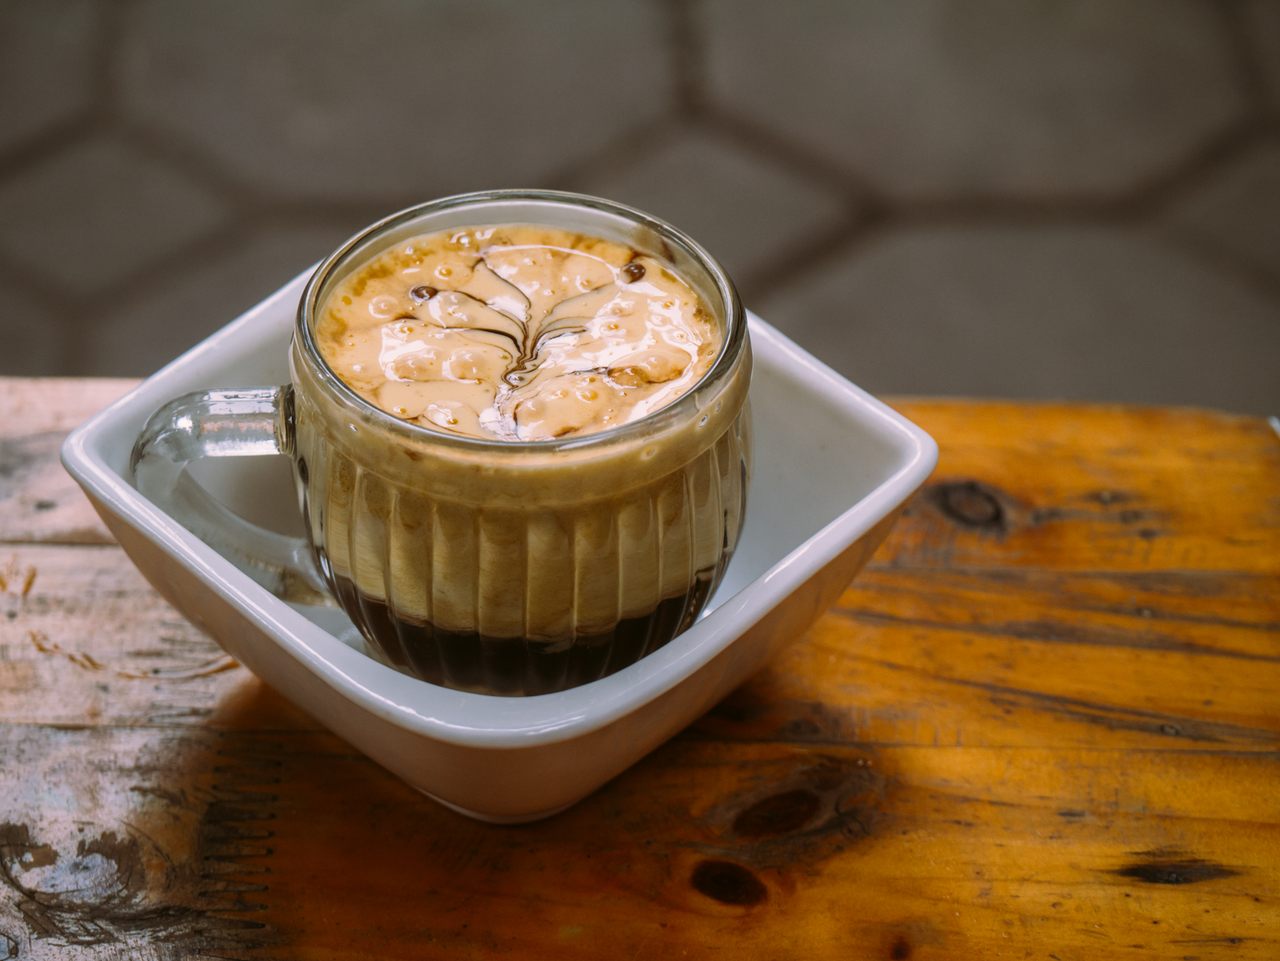 A Vietnamese Egg Coffee with a thick layer of frothy egg foam on top.